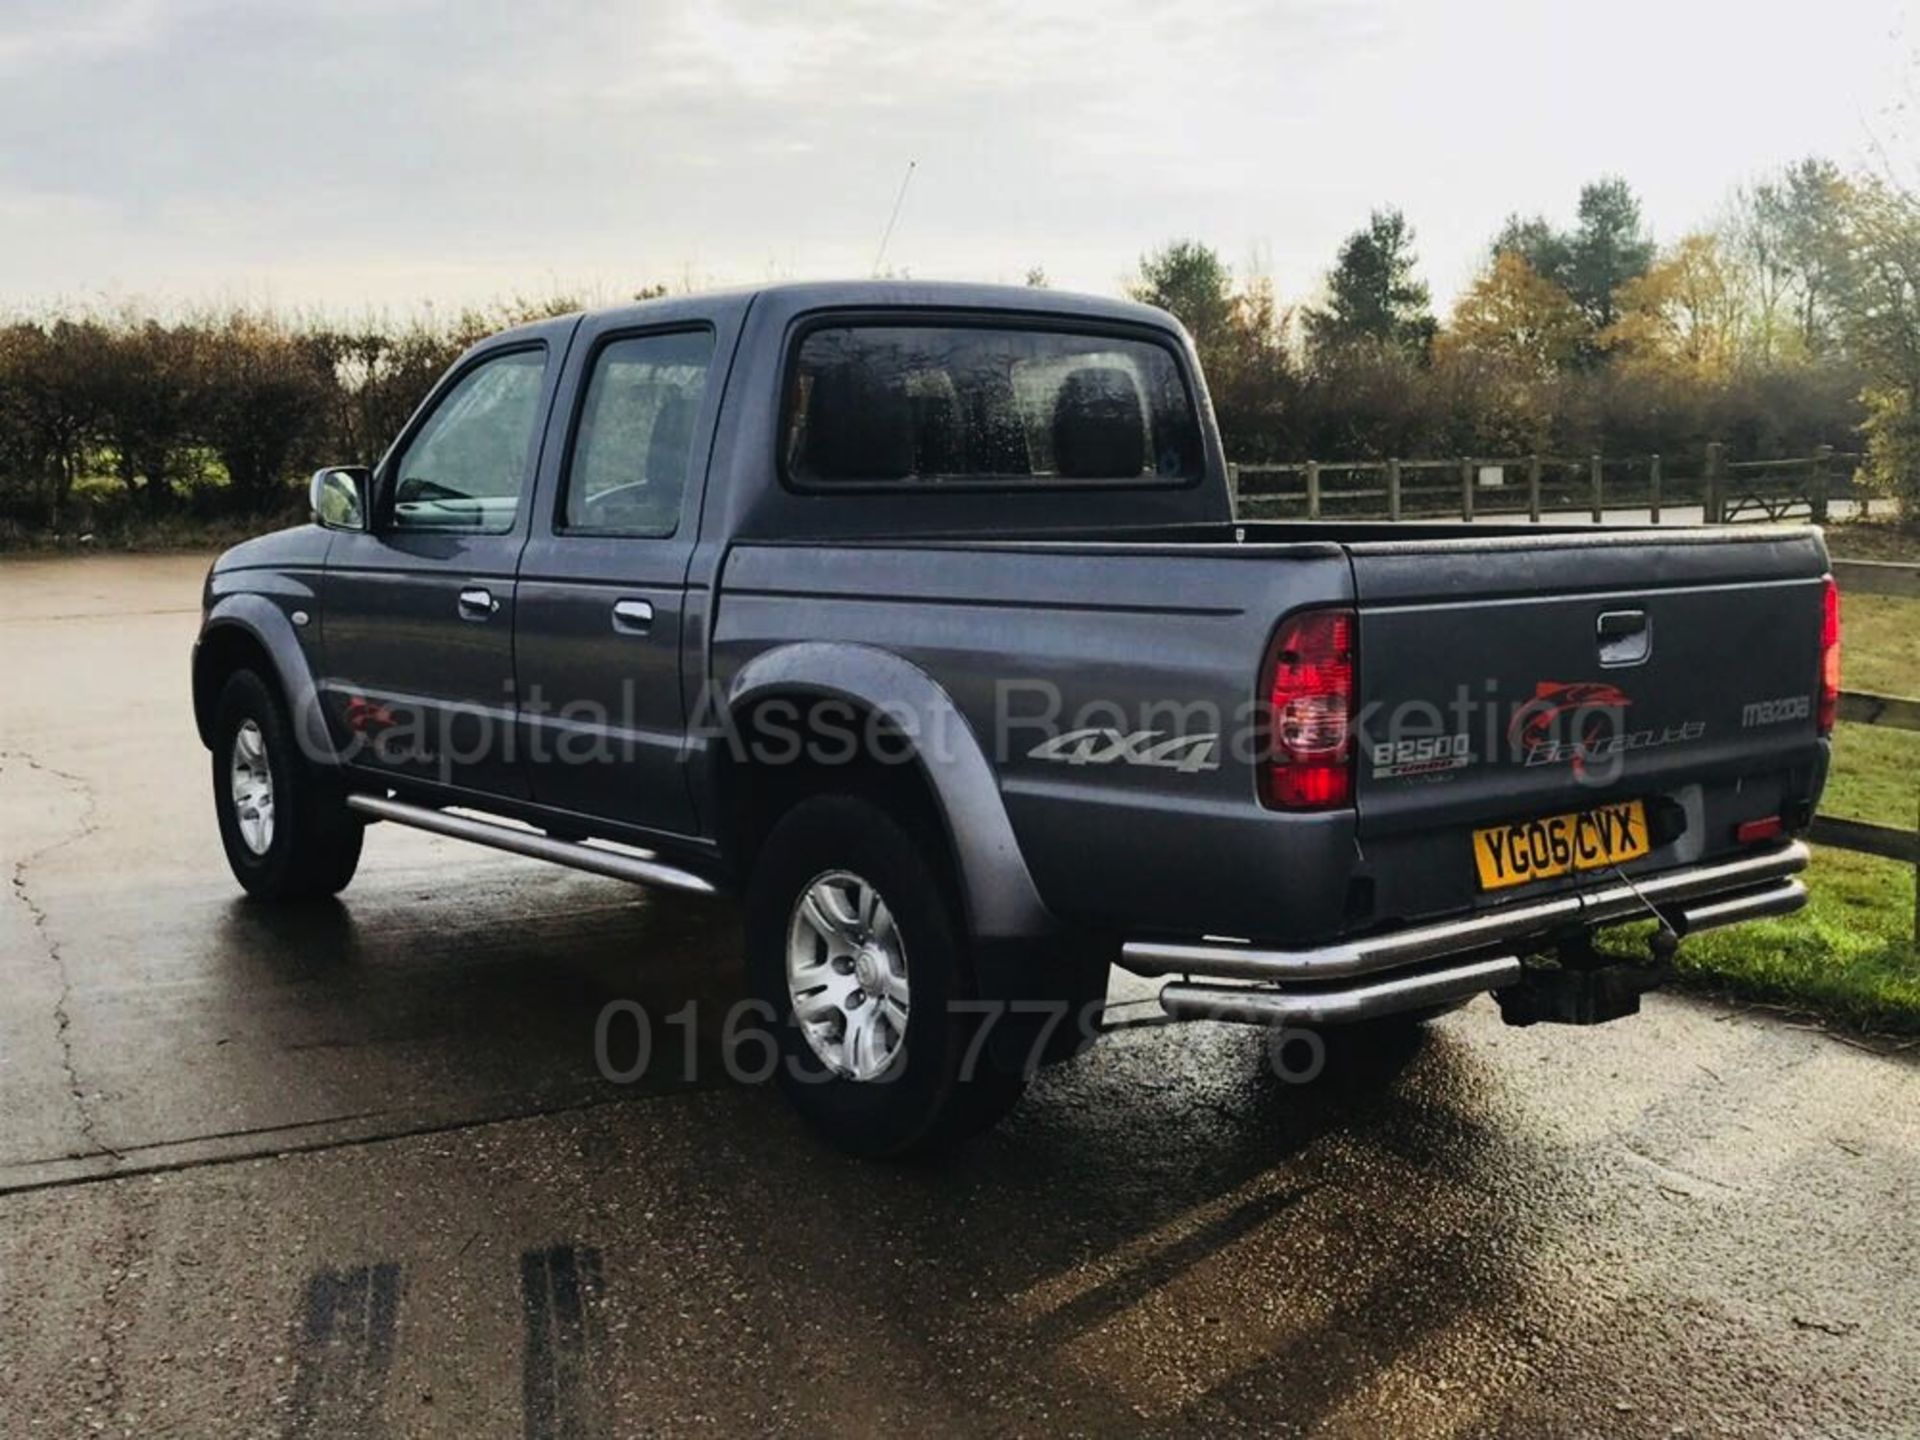 MAZDA B2500 '4-STYLE DOUBLE CAB PICK-UP' (2006 - 06 REG) '2.5 DIESEL - 109 BHP' *AIR CON* (NO VAT) - Image 5 of 18